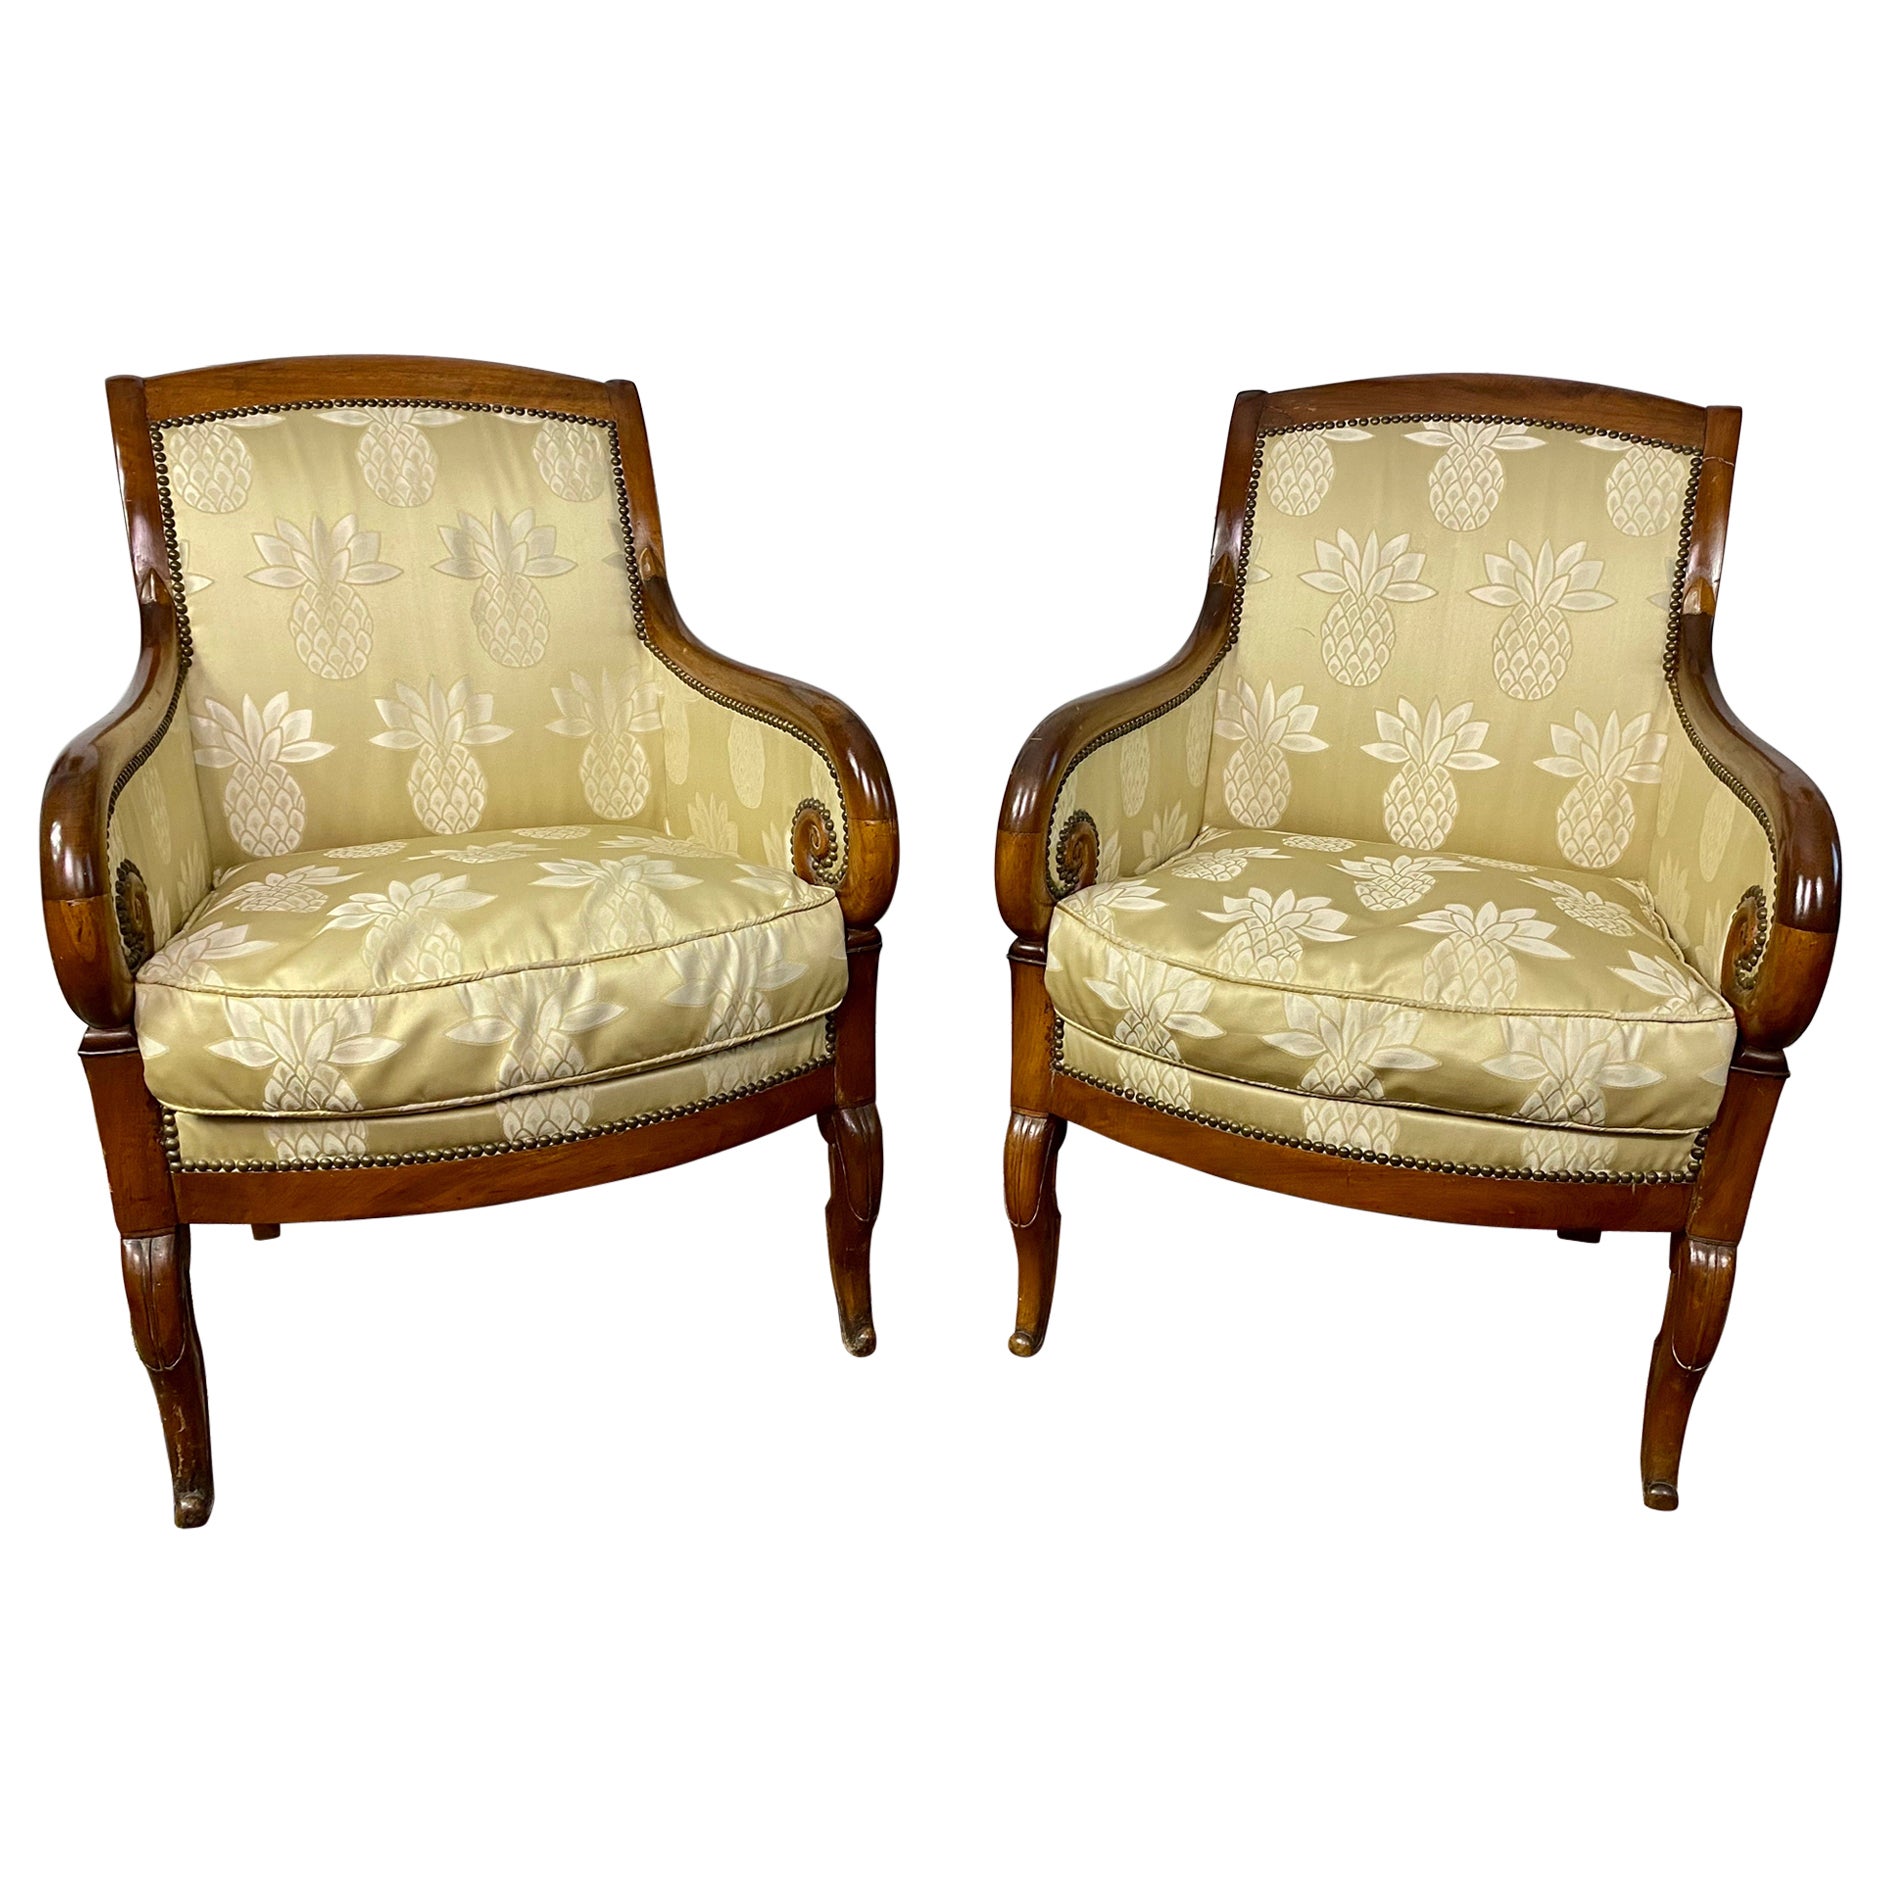 Pair of Armchairs from the Louis-Philippe Period Beginning of the 19th Century